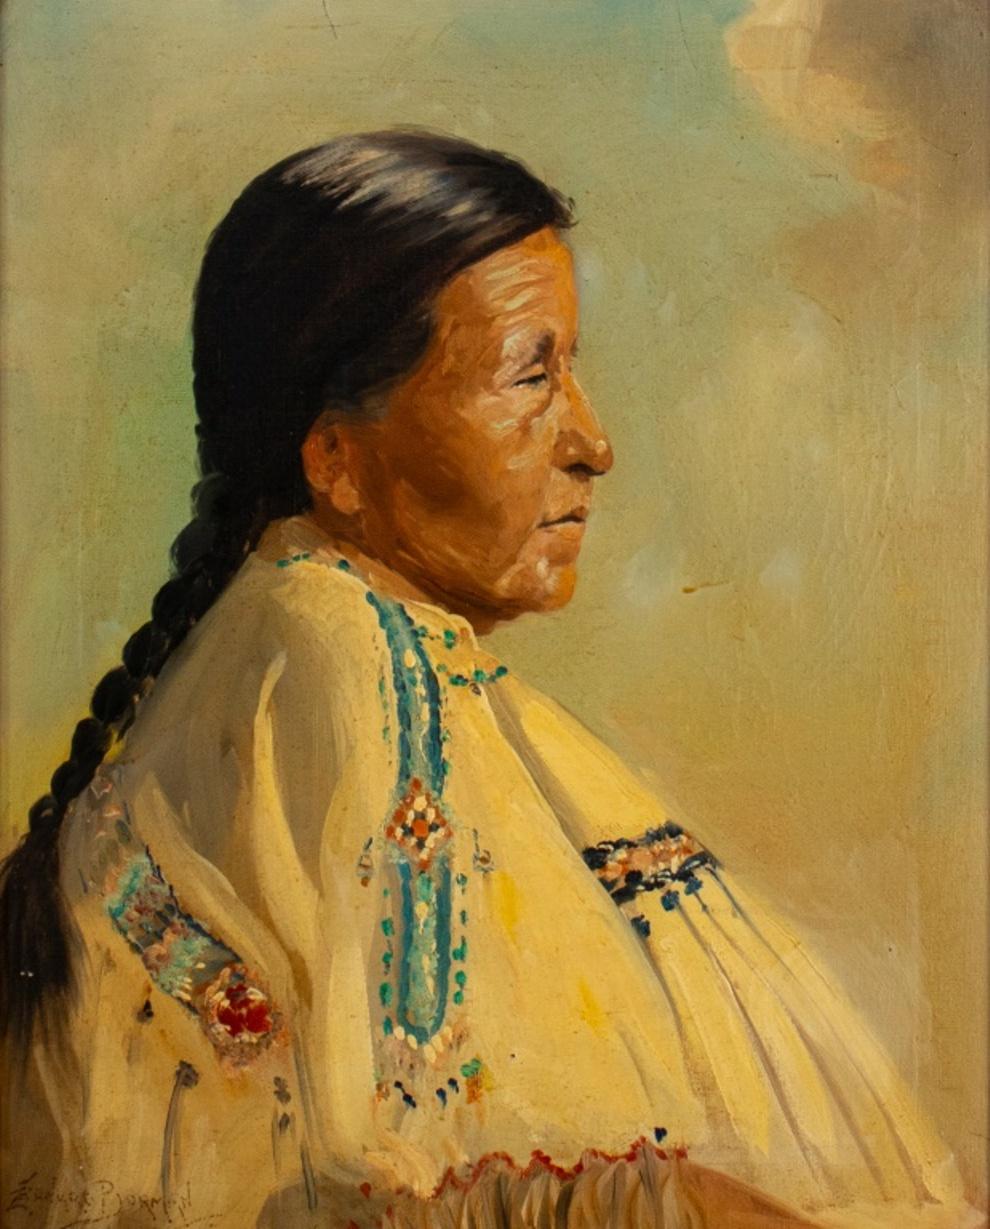 Leonard Borman (British/American, 1894-1995) oil painting on canvas depicting the portrait of a Native American woman looking right, signed lower left, housed in a distressed and gilt wood frame.

Dimensions: Image: 19.5